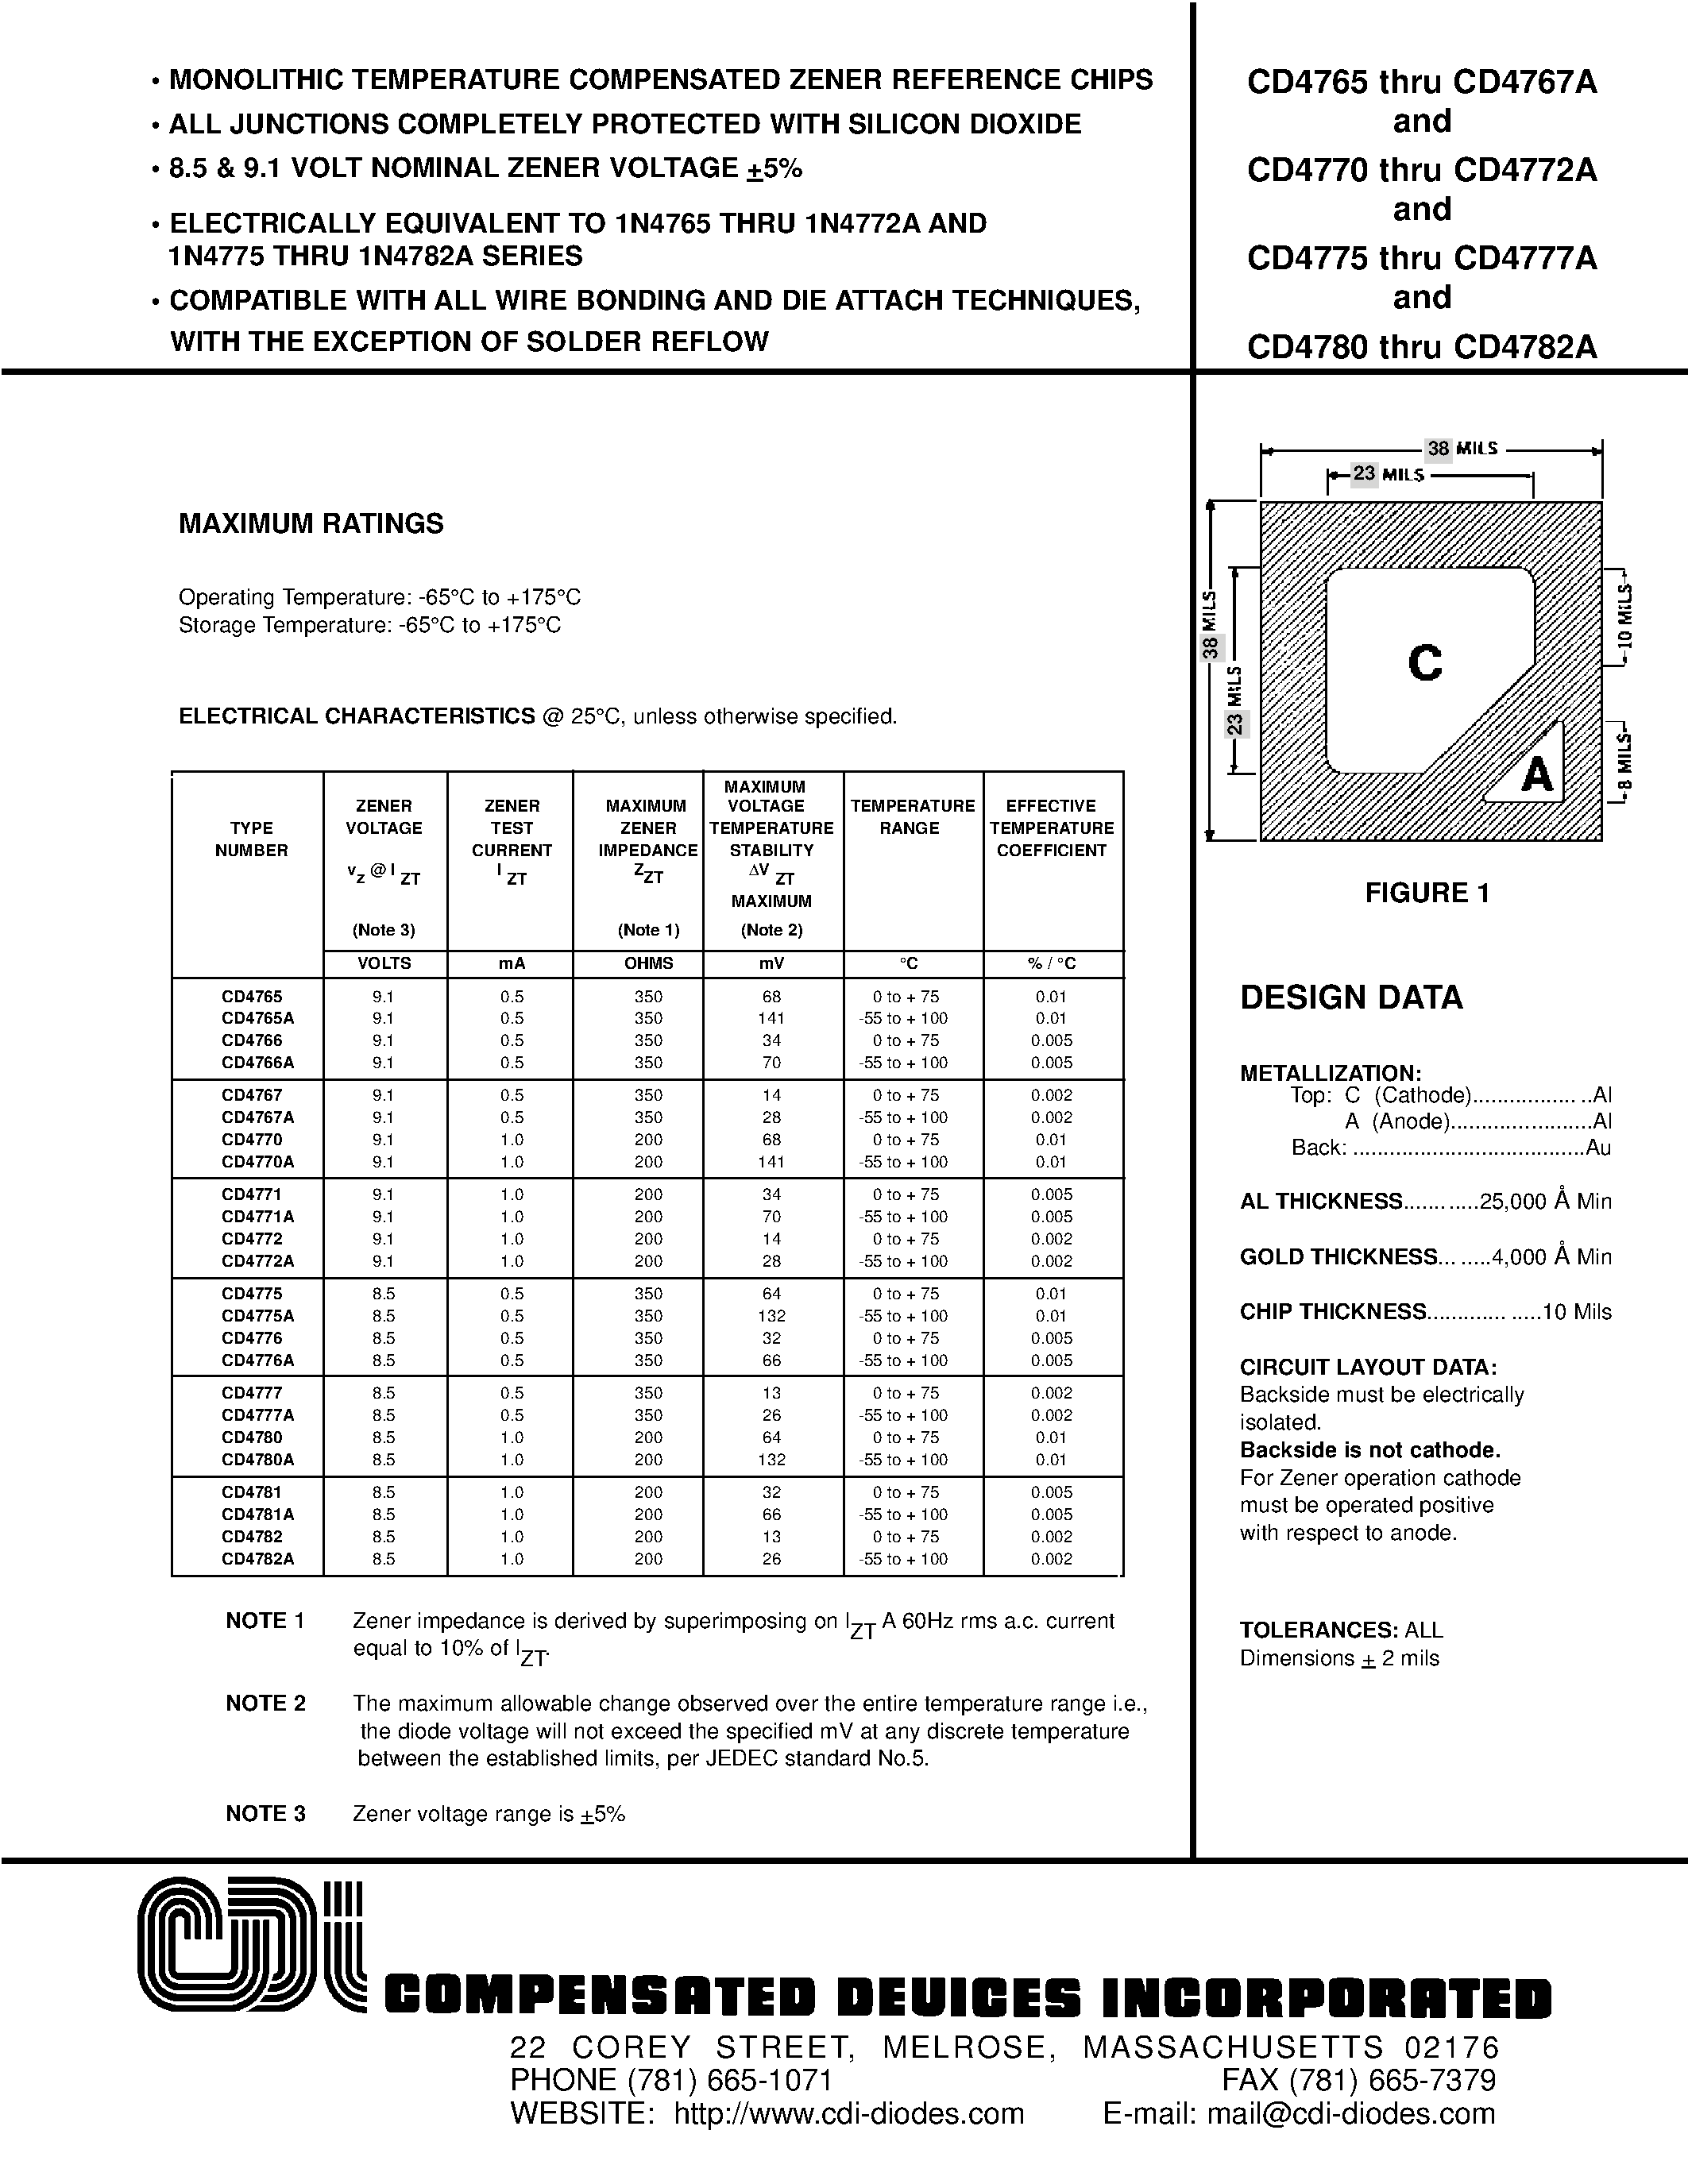 Datasheet CD4767 - MONOLITHIC TEMPERATURE COMPENSATED ZENER REFERENCE CHIPS page 1